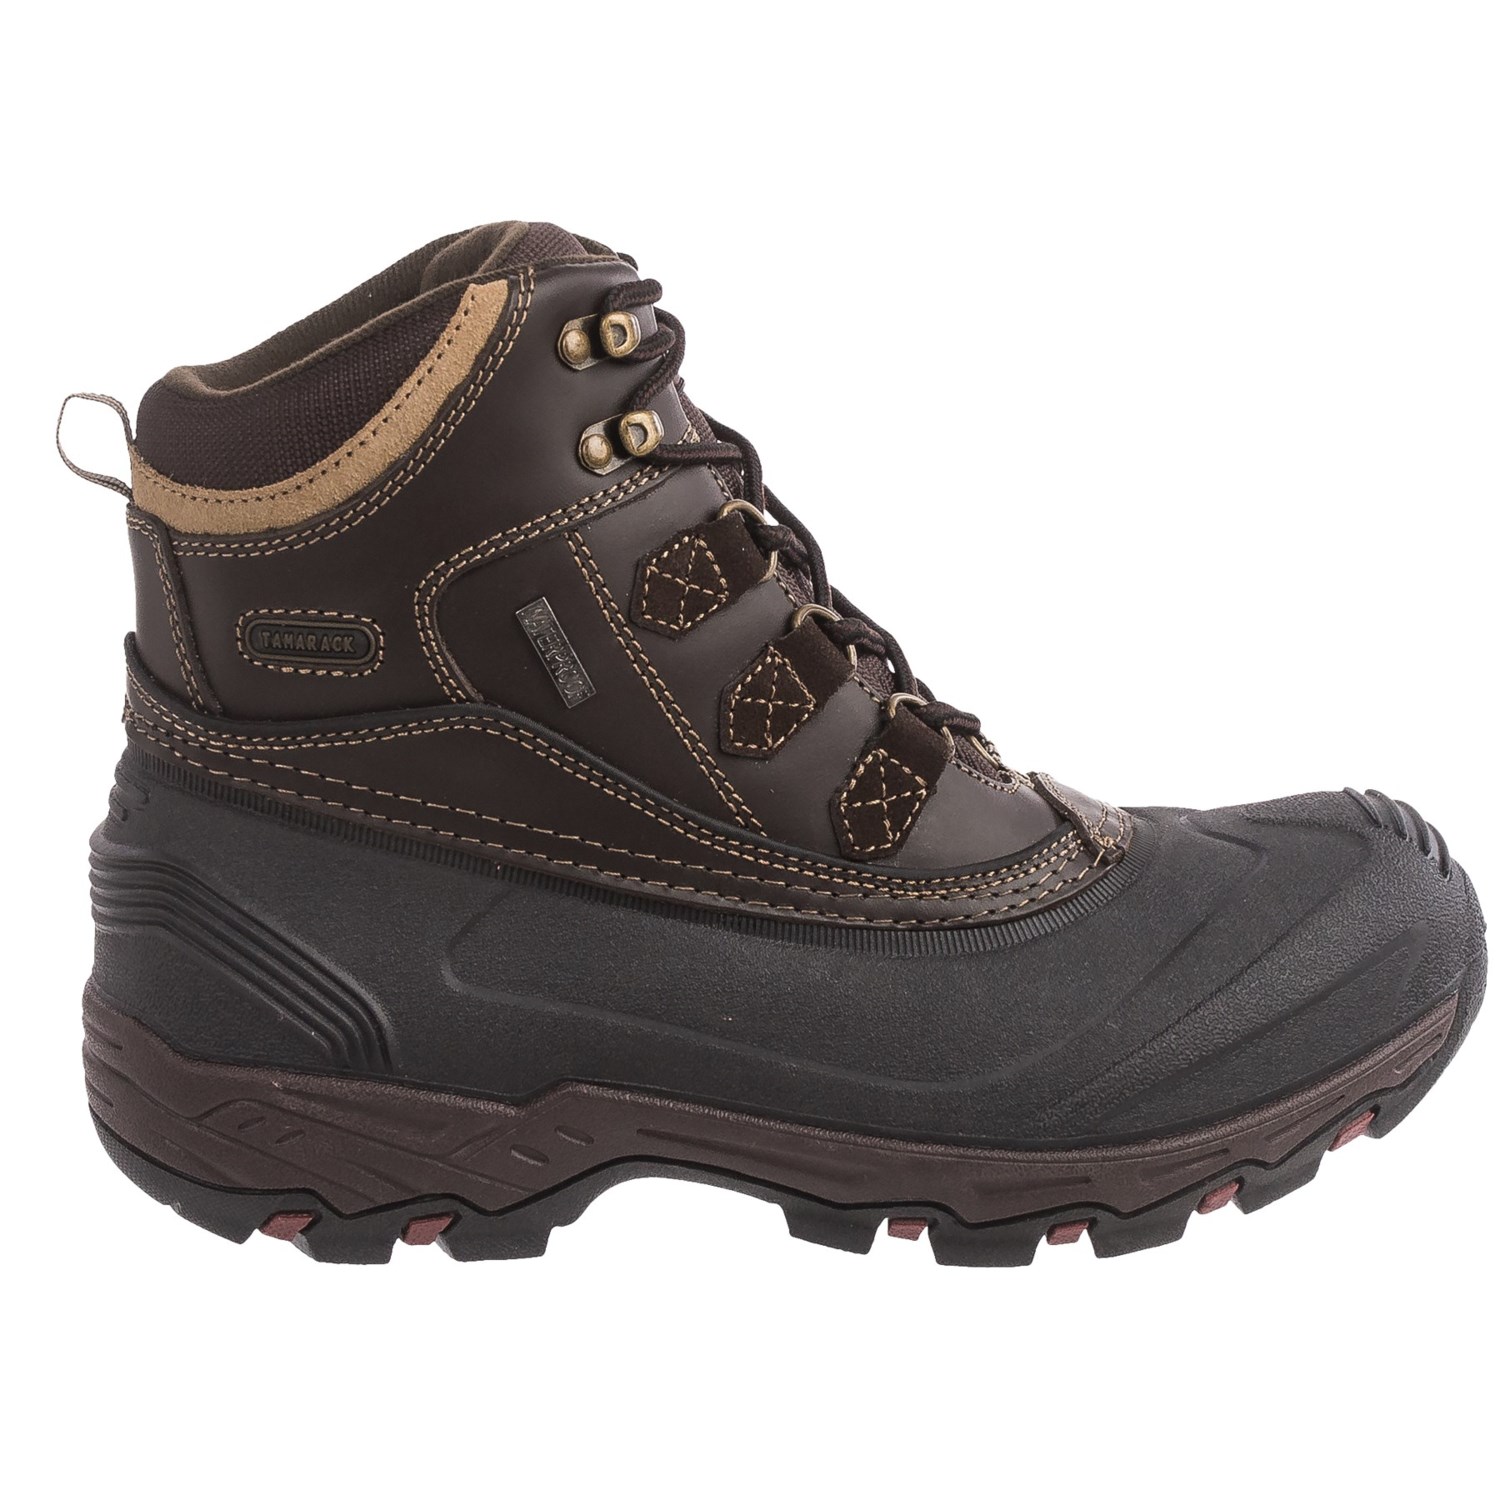 Tamarack 400g Thinsulate® Snow Boots (For Men) Save 30